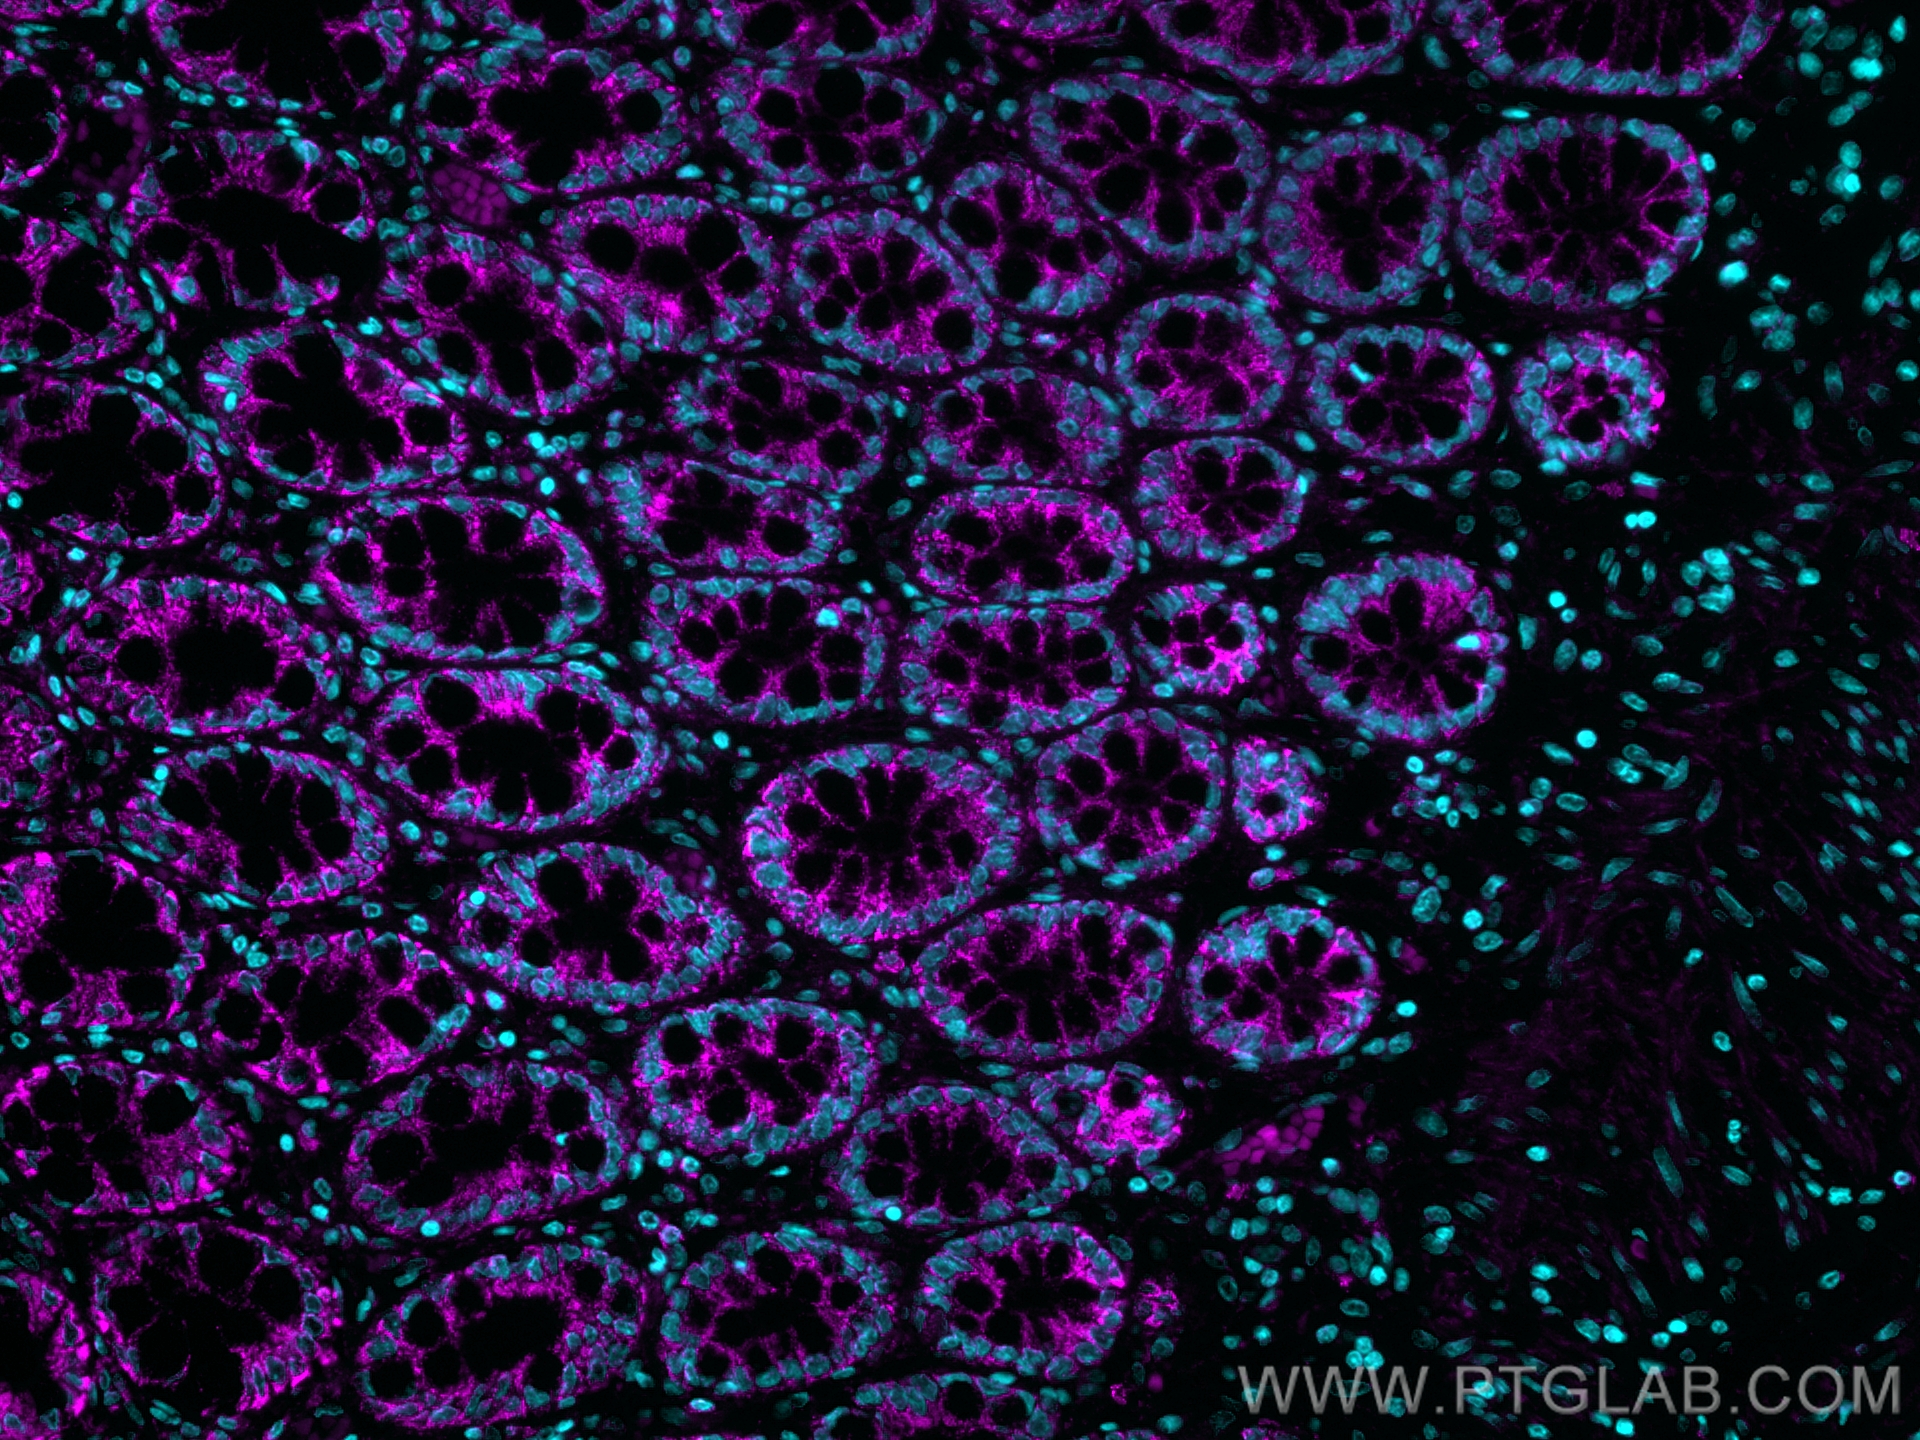 Immunofluorescence of human colon: FFPE human colon sections were stained with anti-KRT20 antibody (60183-1-Ig) labeled with FlexAble Biotin Antibody Labeling Kit for Mouse IgG2b (KFA067) and Streptavidin-650 (magenta). Cell nuclei are in blue.